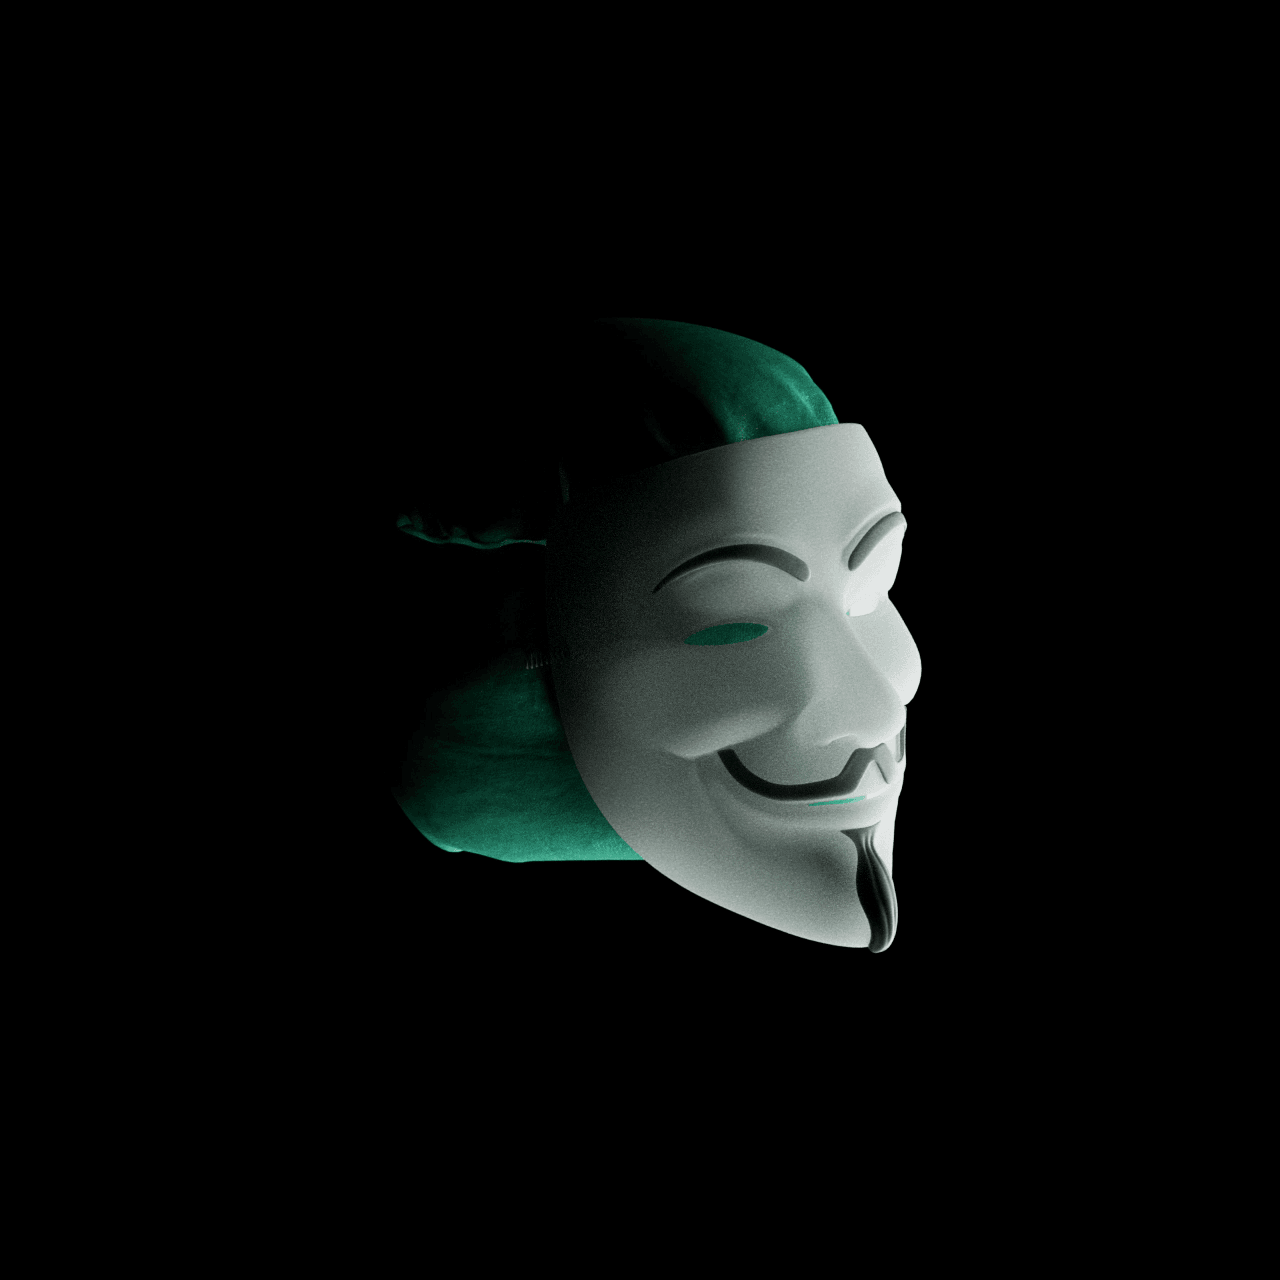 The 33 Mask